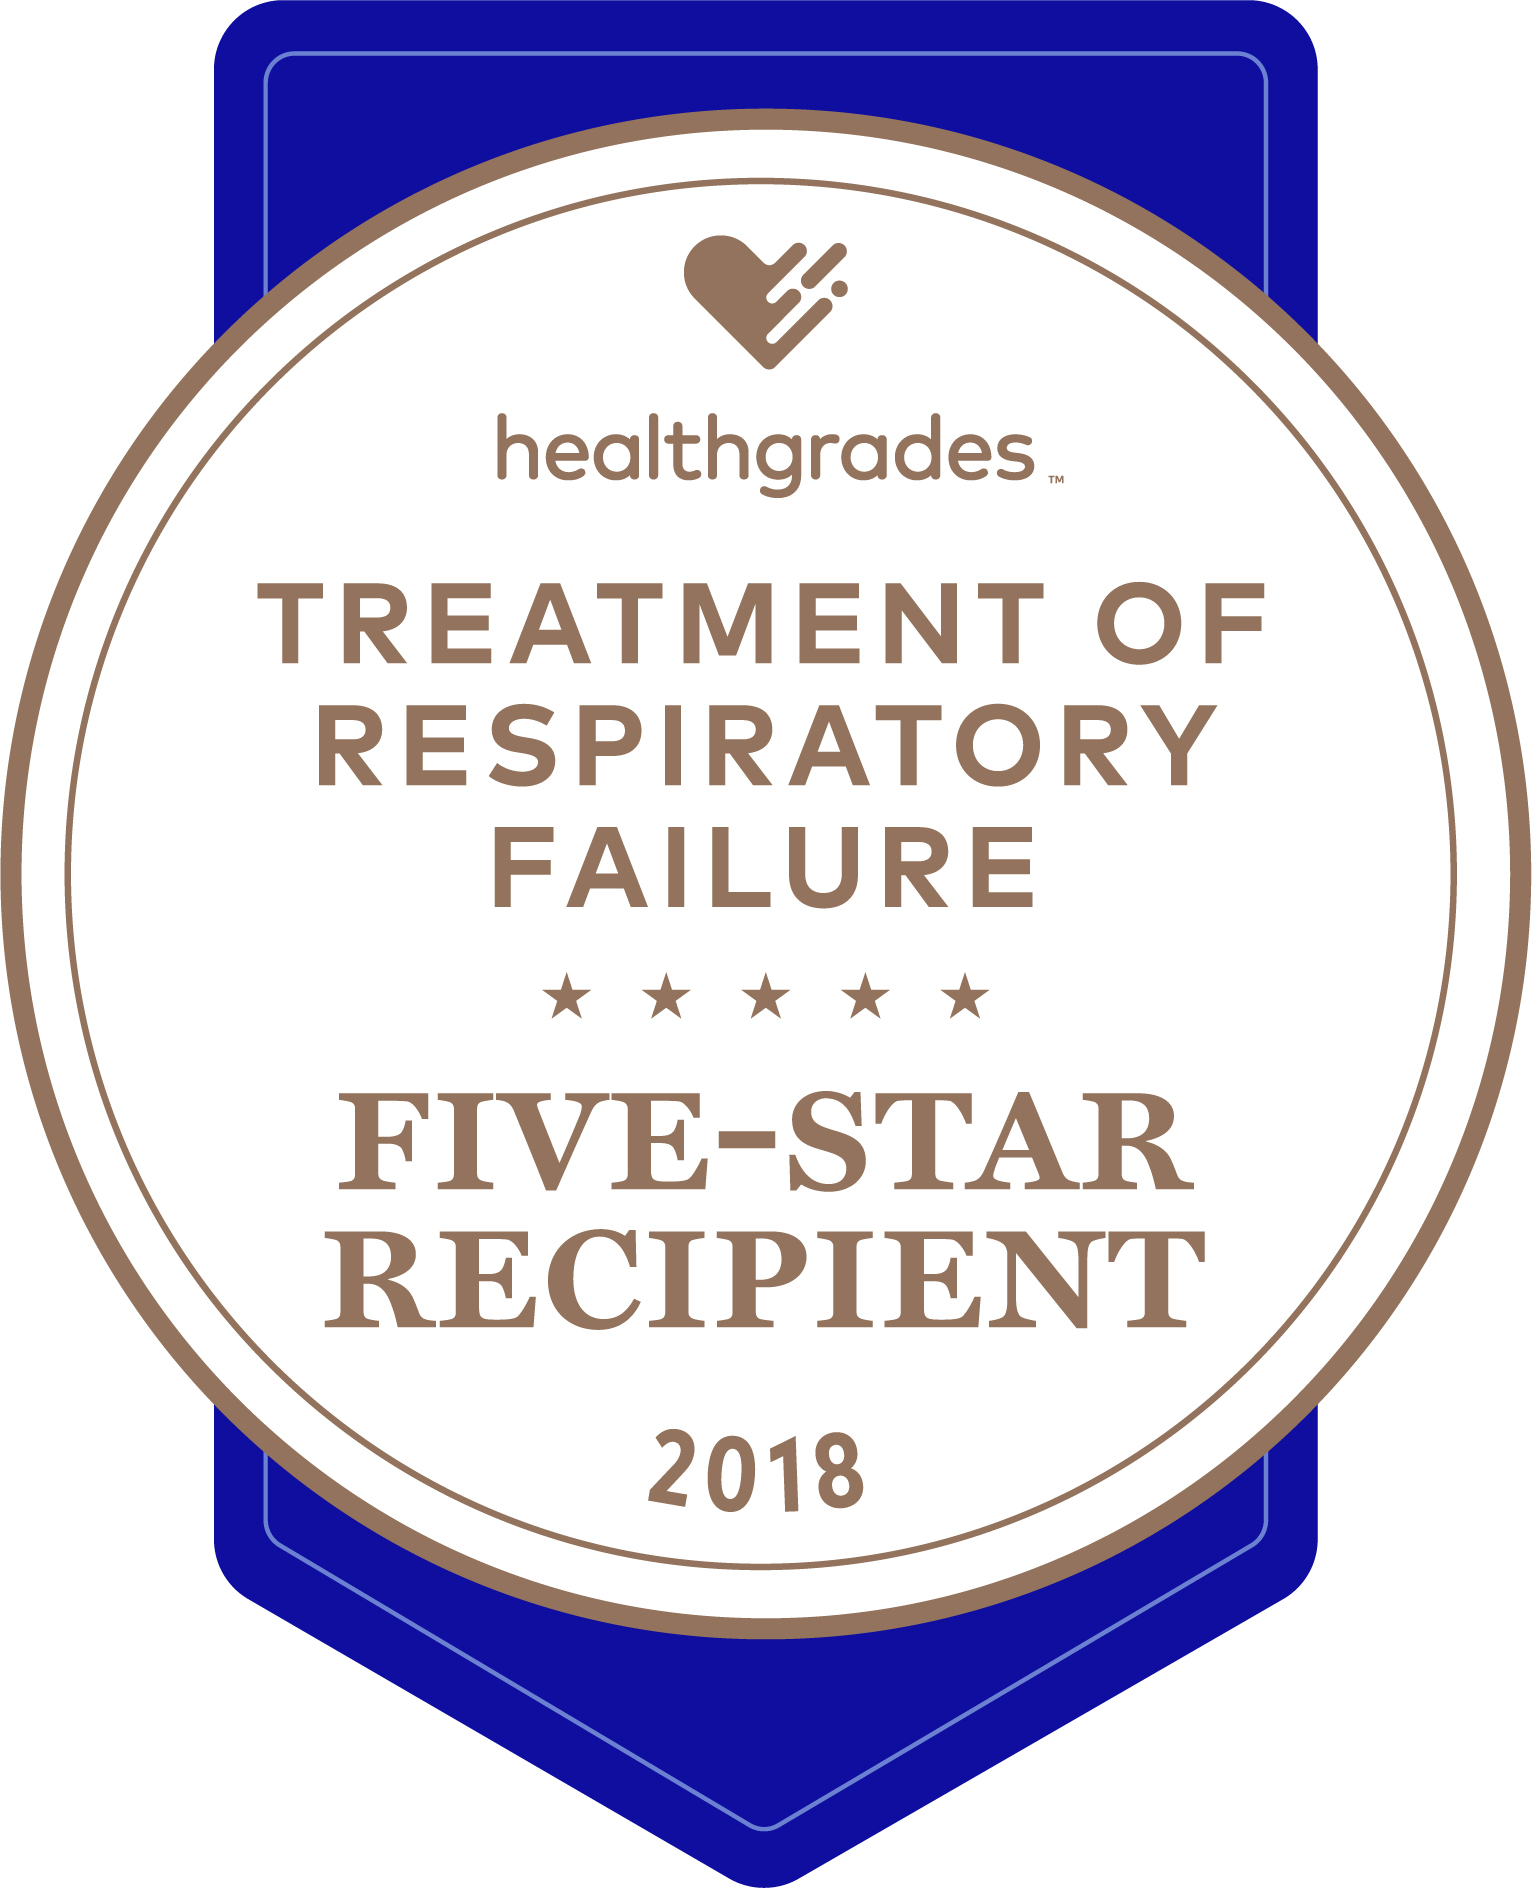 HG_Five_Star_for_Treatment_of_Respiratory_Failure_Image_2018